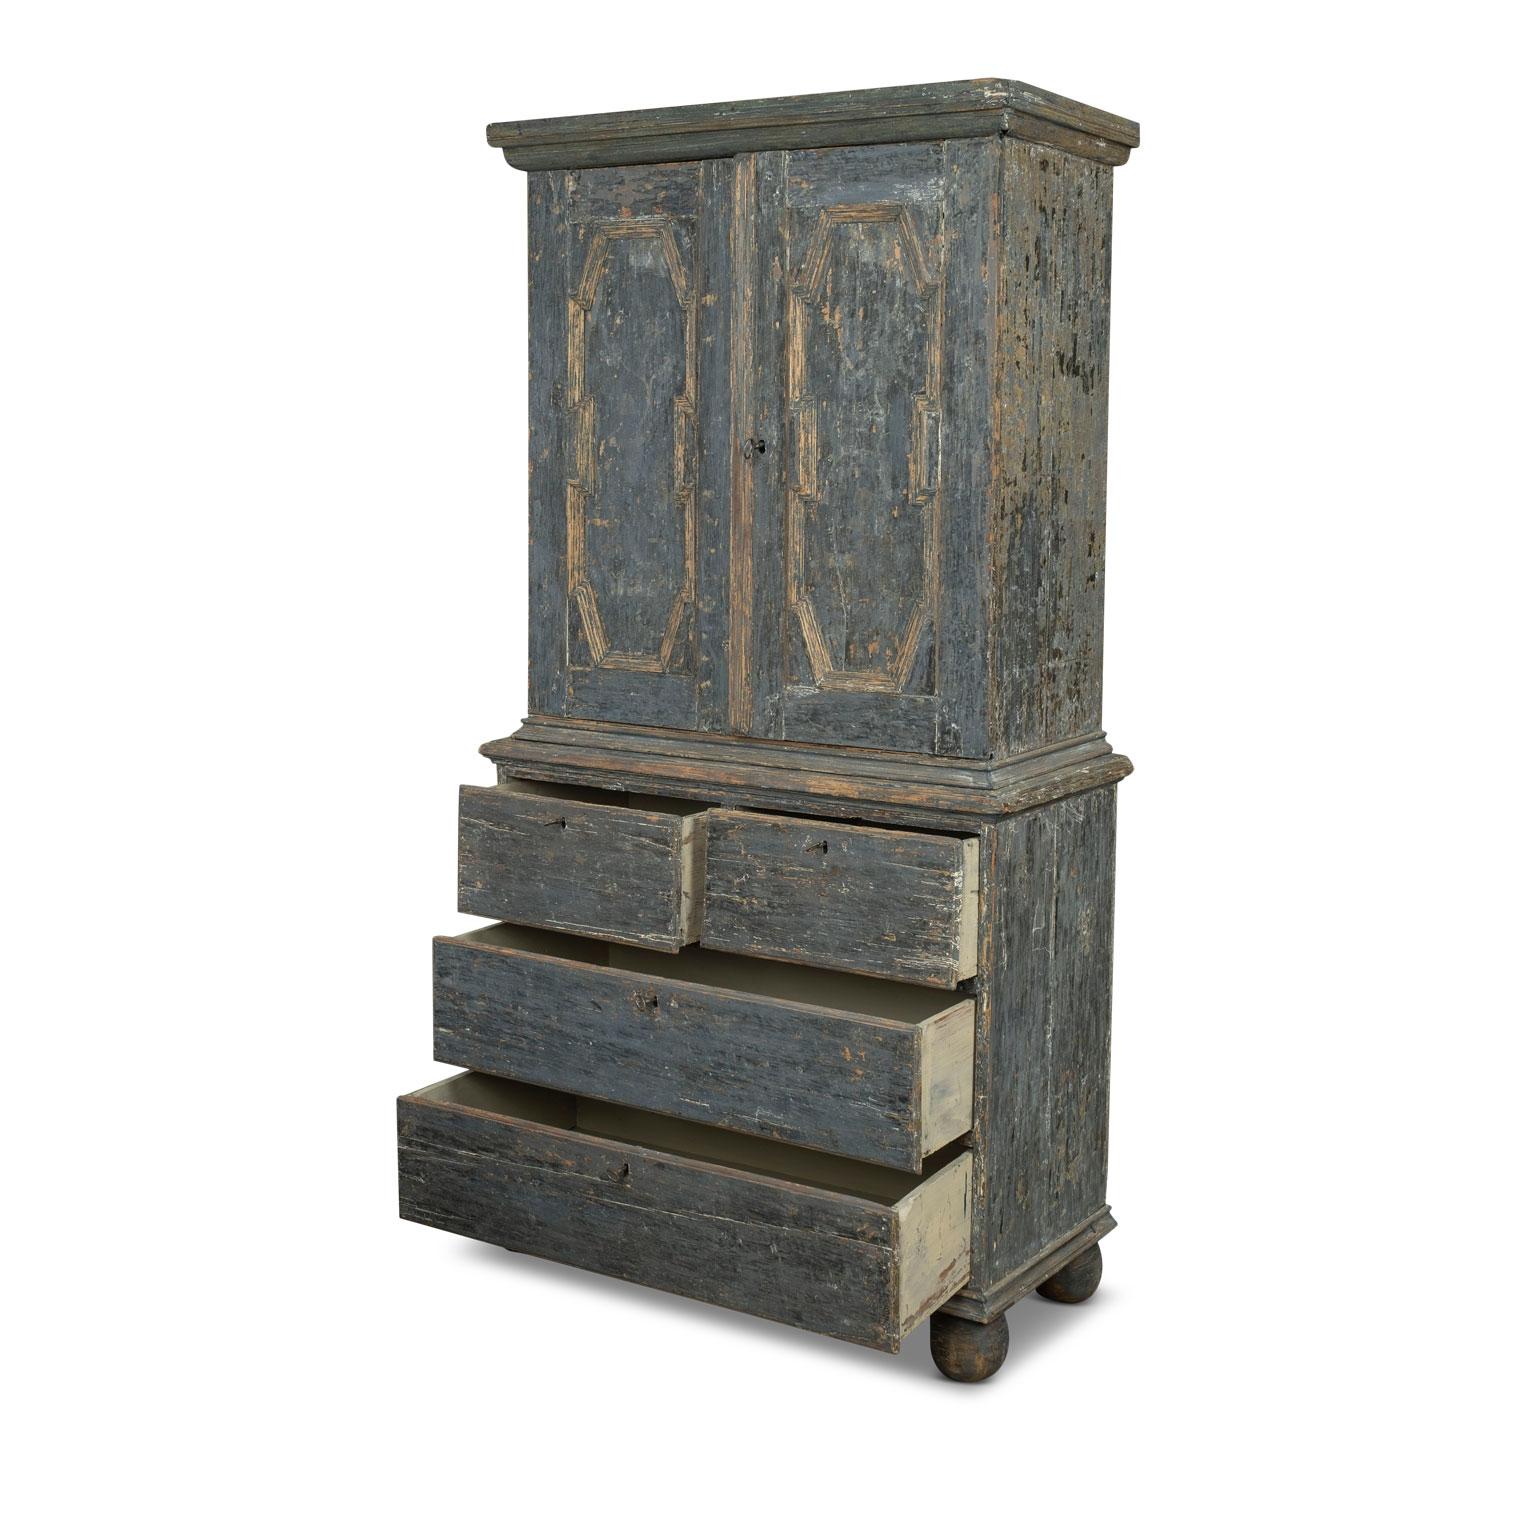 Late baroque Swedish cupboard (buffet a deux corps) scraped back to original and early layers of blue paint (with remnants of green and beige). Constructed circa 1720-1740 using mortise and tenon joints. Decorated in trim molding. Cupboard consists